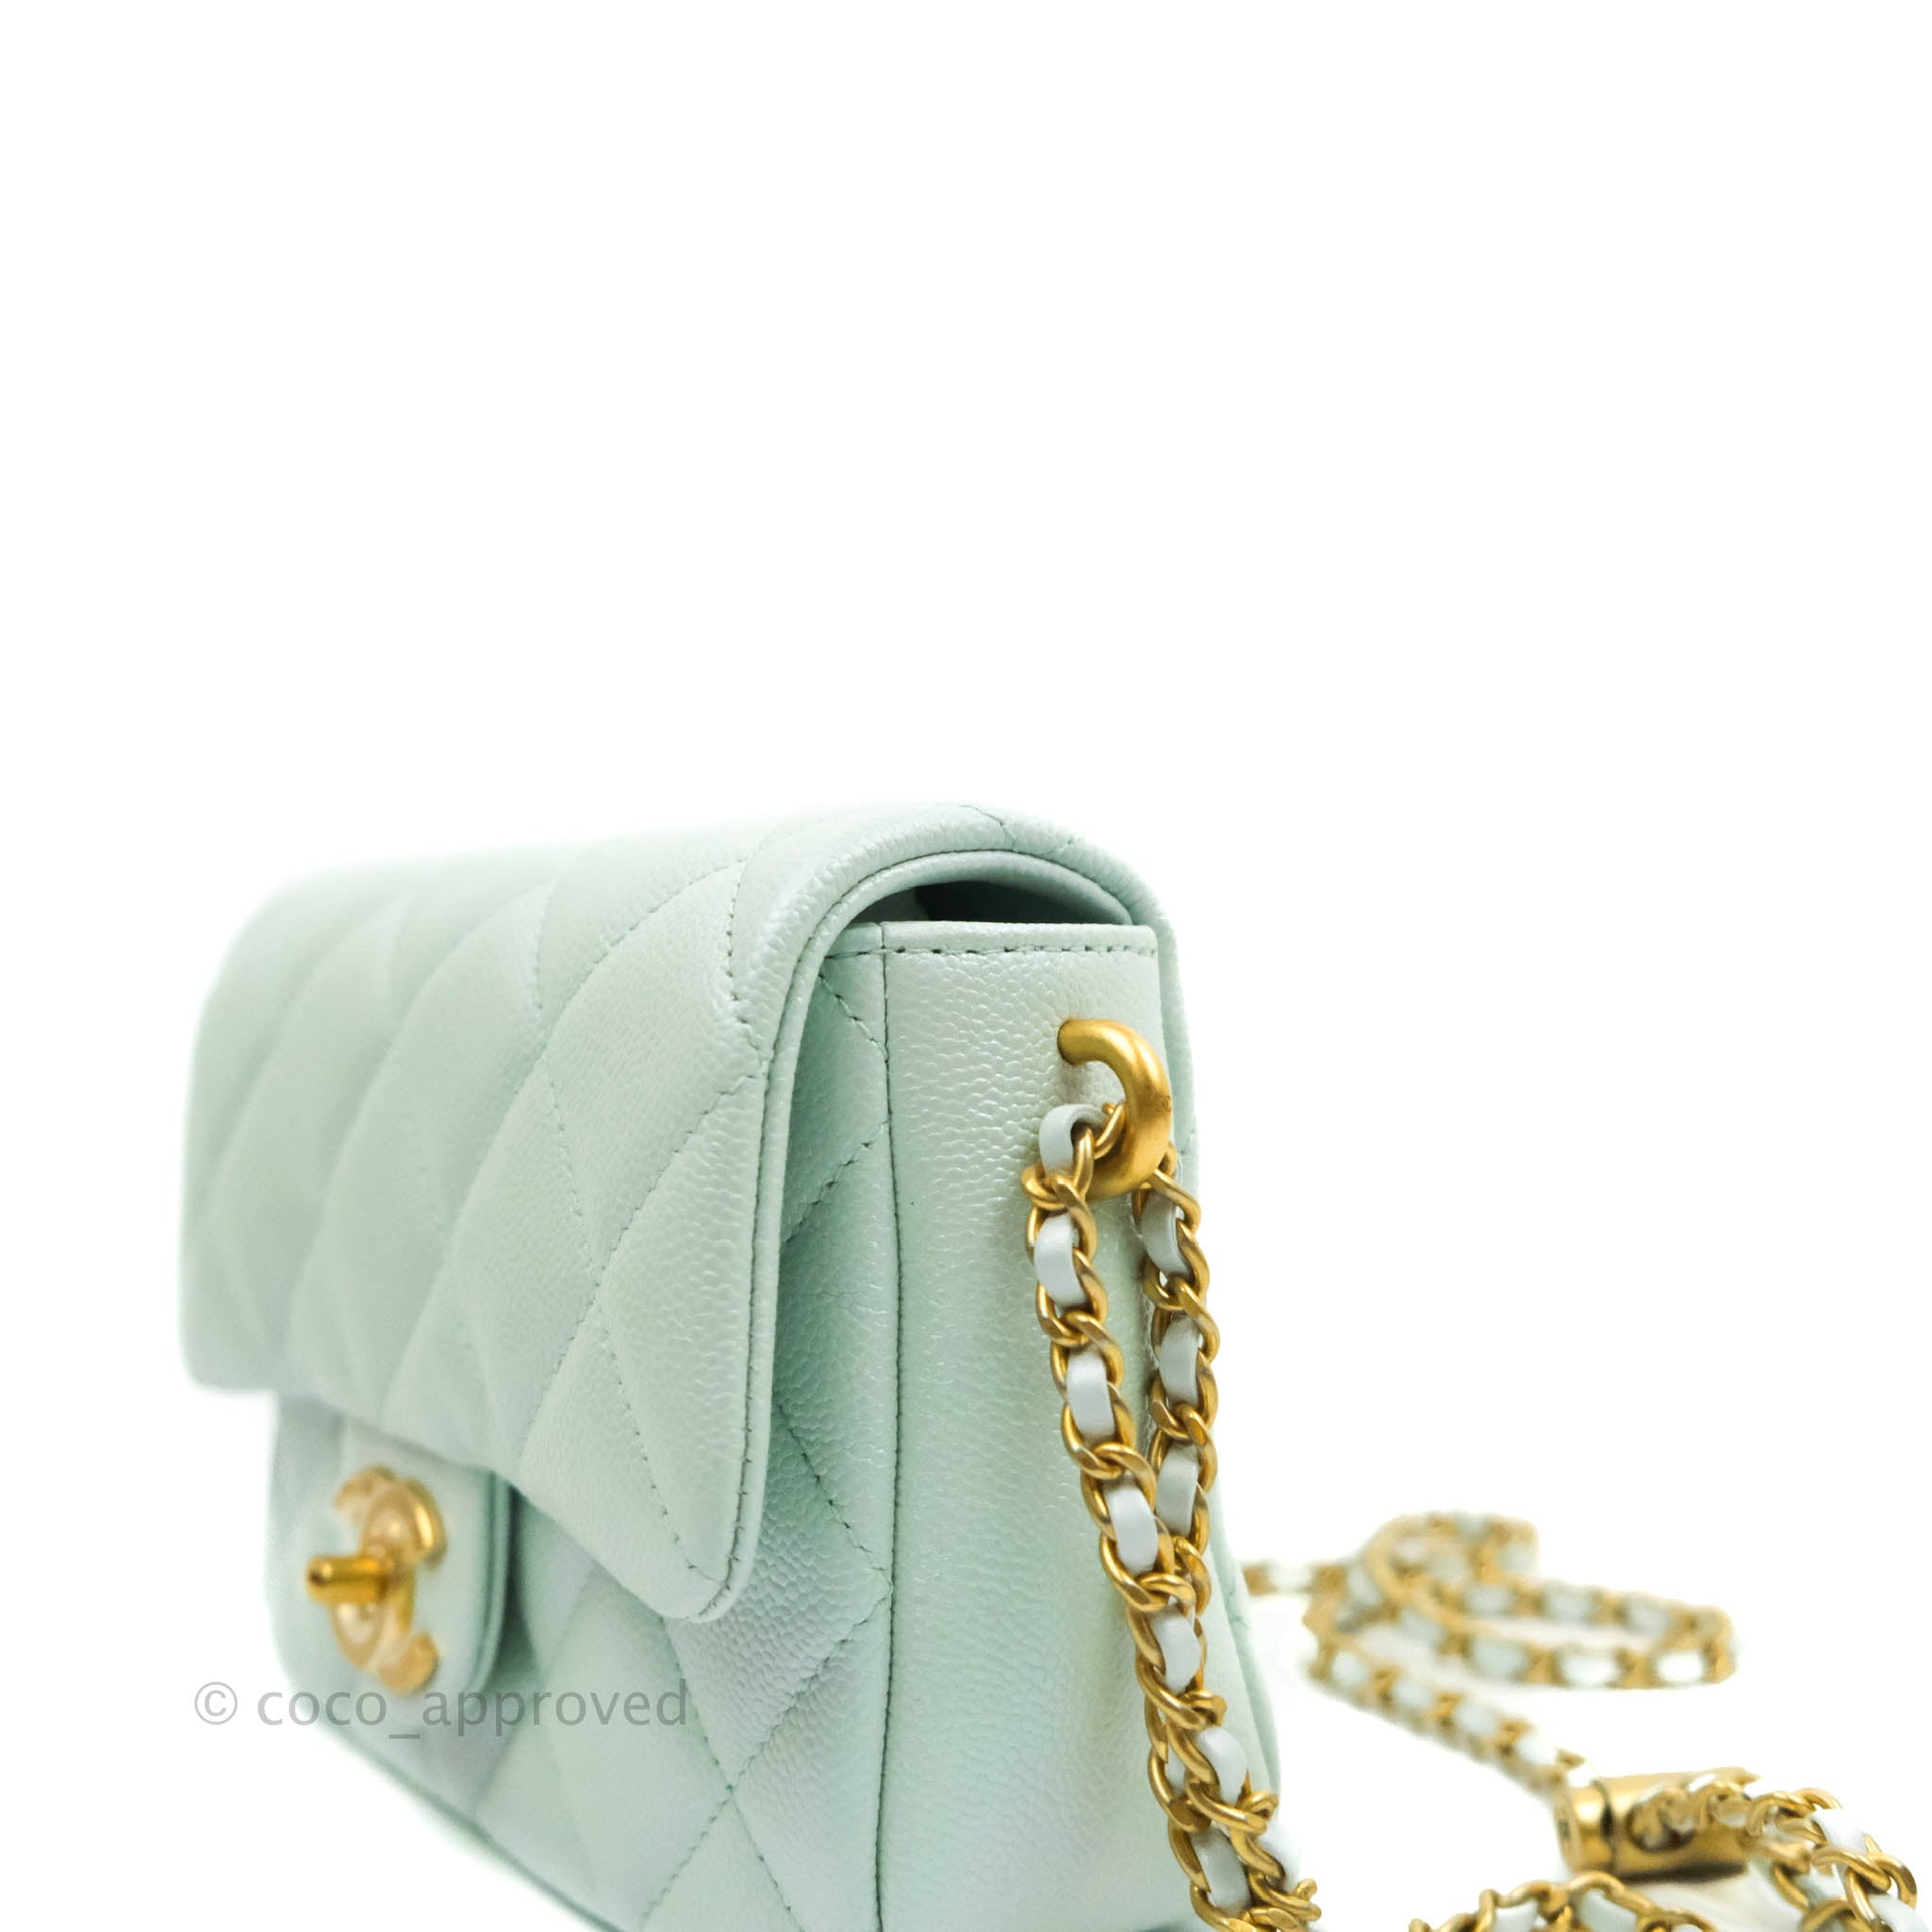 Naughtipidgins Nest - Chanel Business Affinity Large Flap Bag in Emerald  Green Caviar with Shiny Champagne Gold Hardware. The perfect green, this  stunning Chanel is utterly divine. Pale gold hardware, elegant top